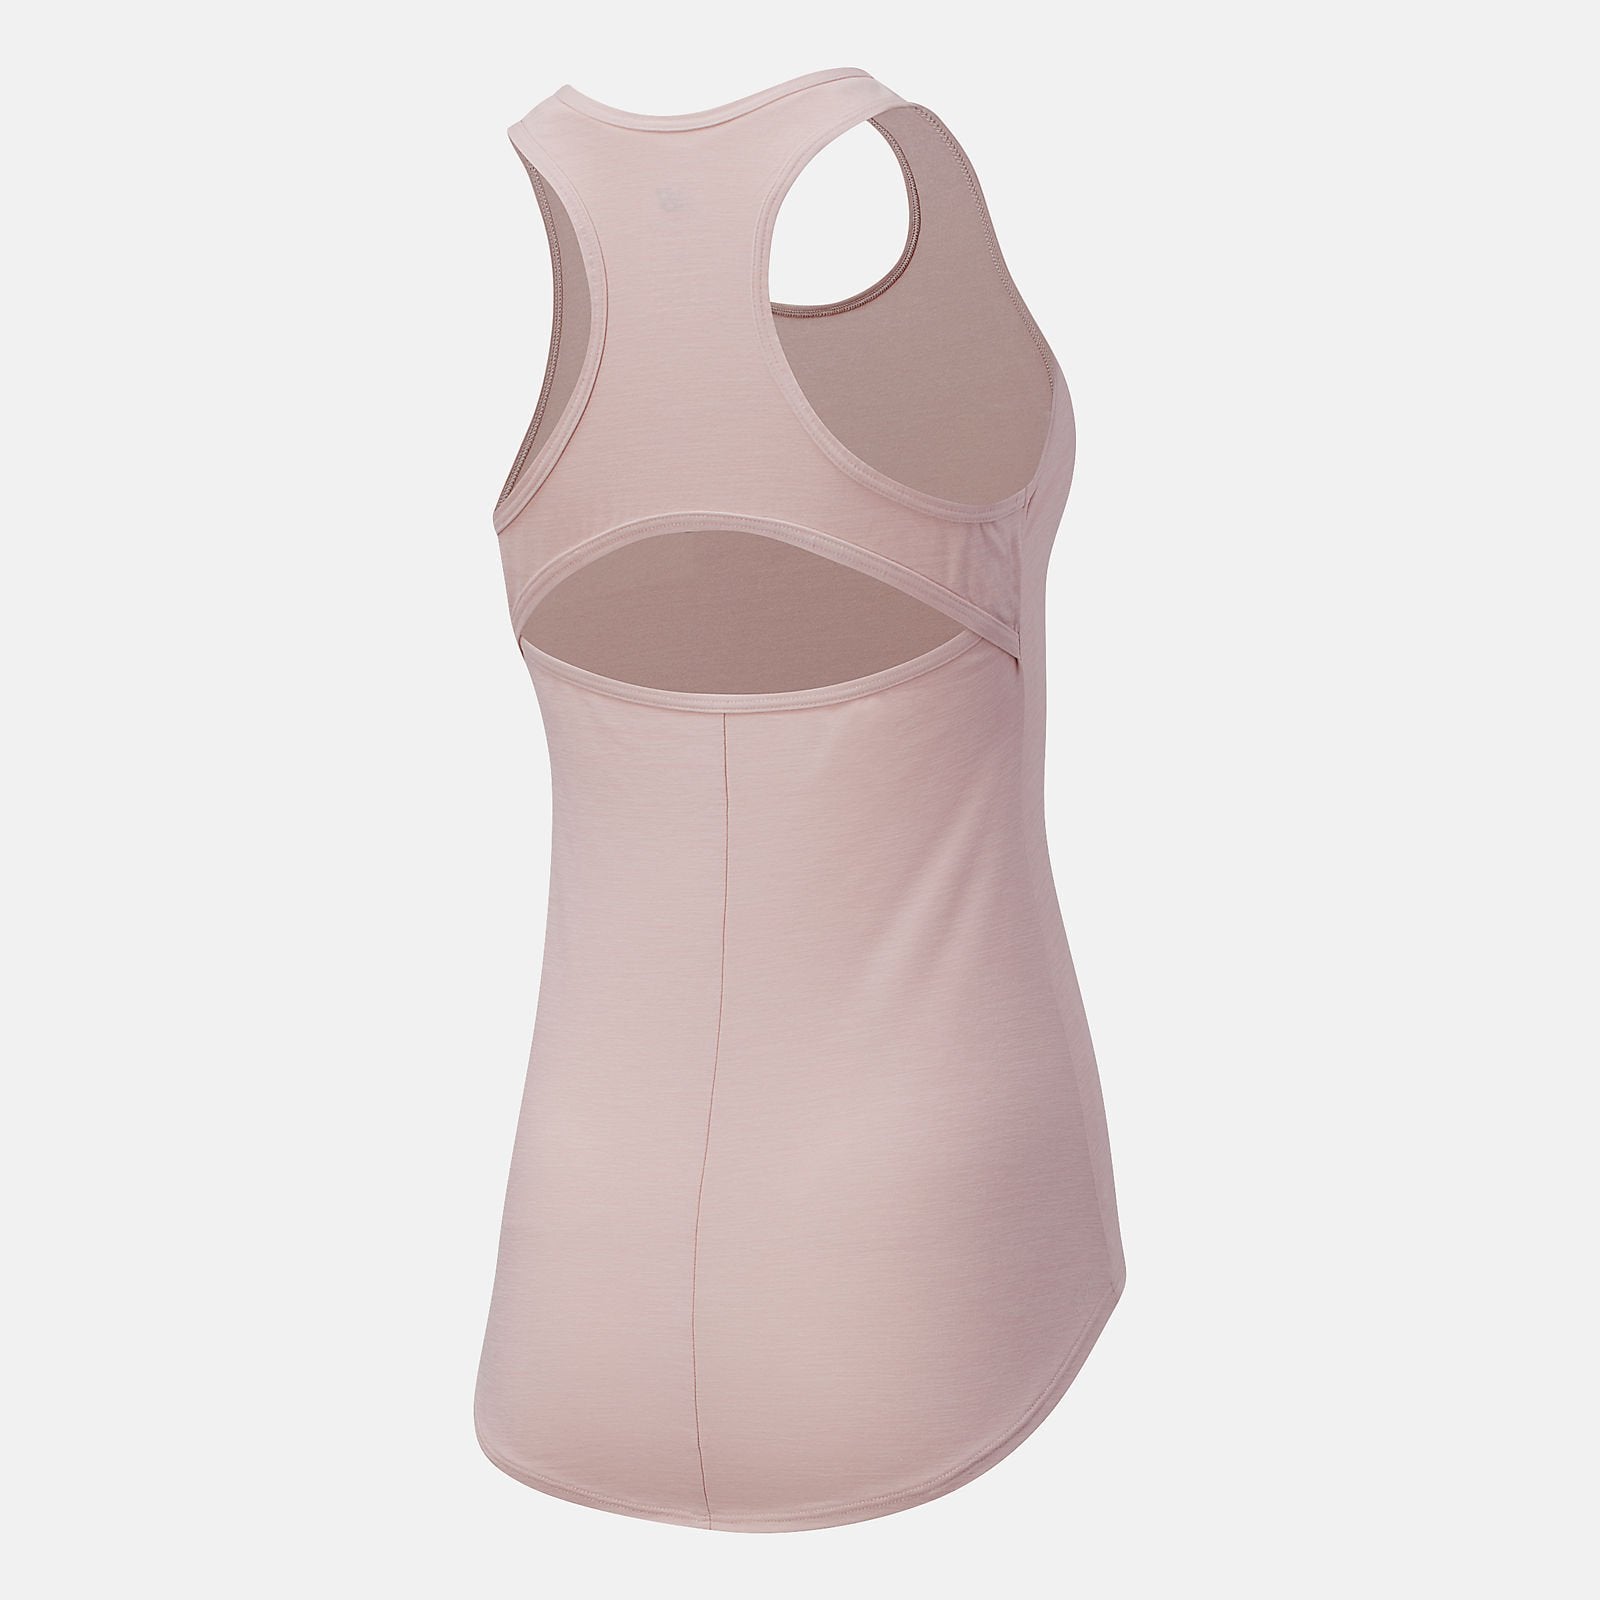 Back view of the Women's Transform Perfect Tank by New Balance in Pink